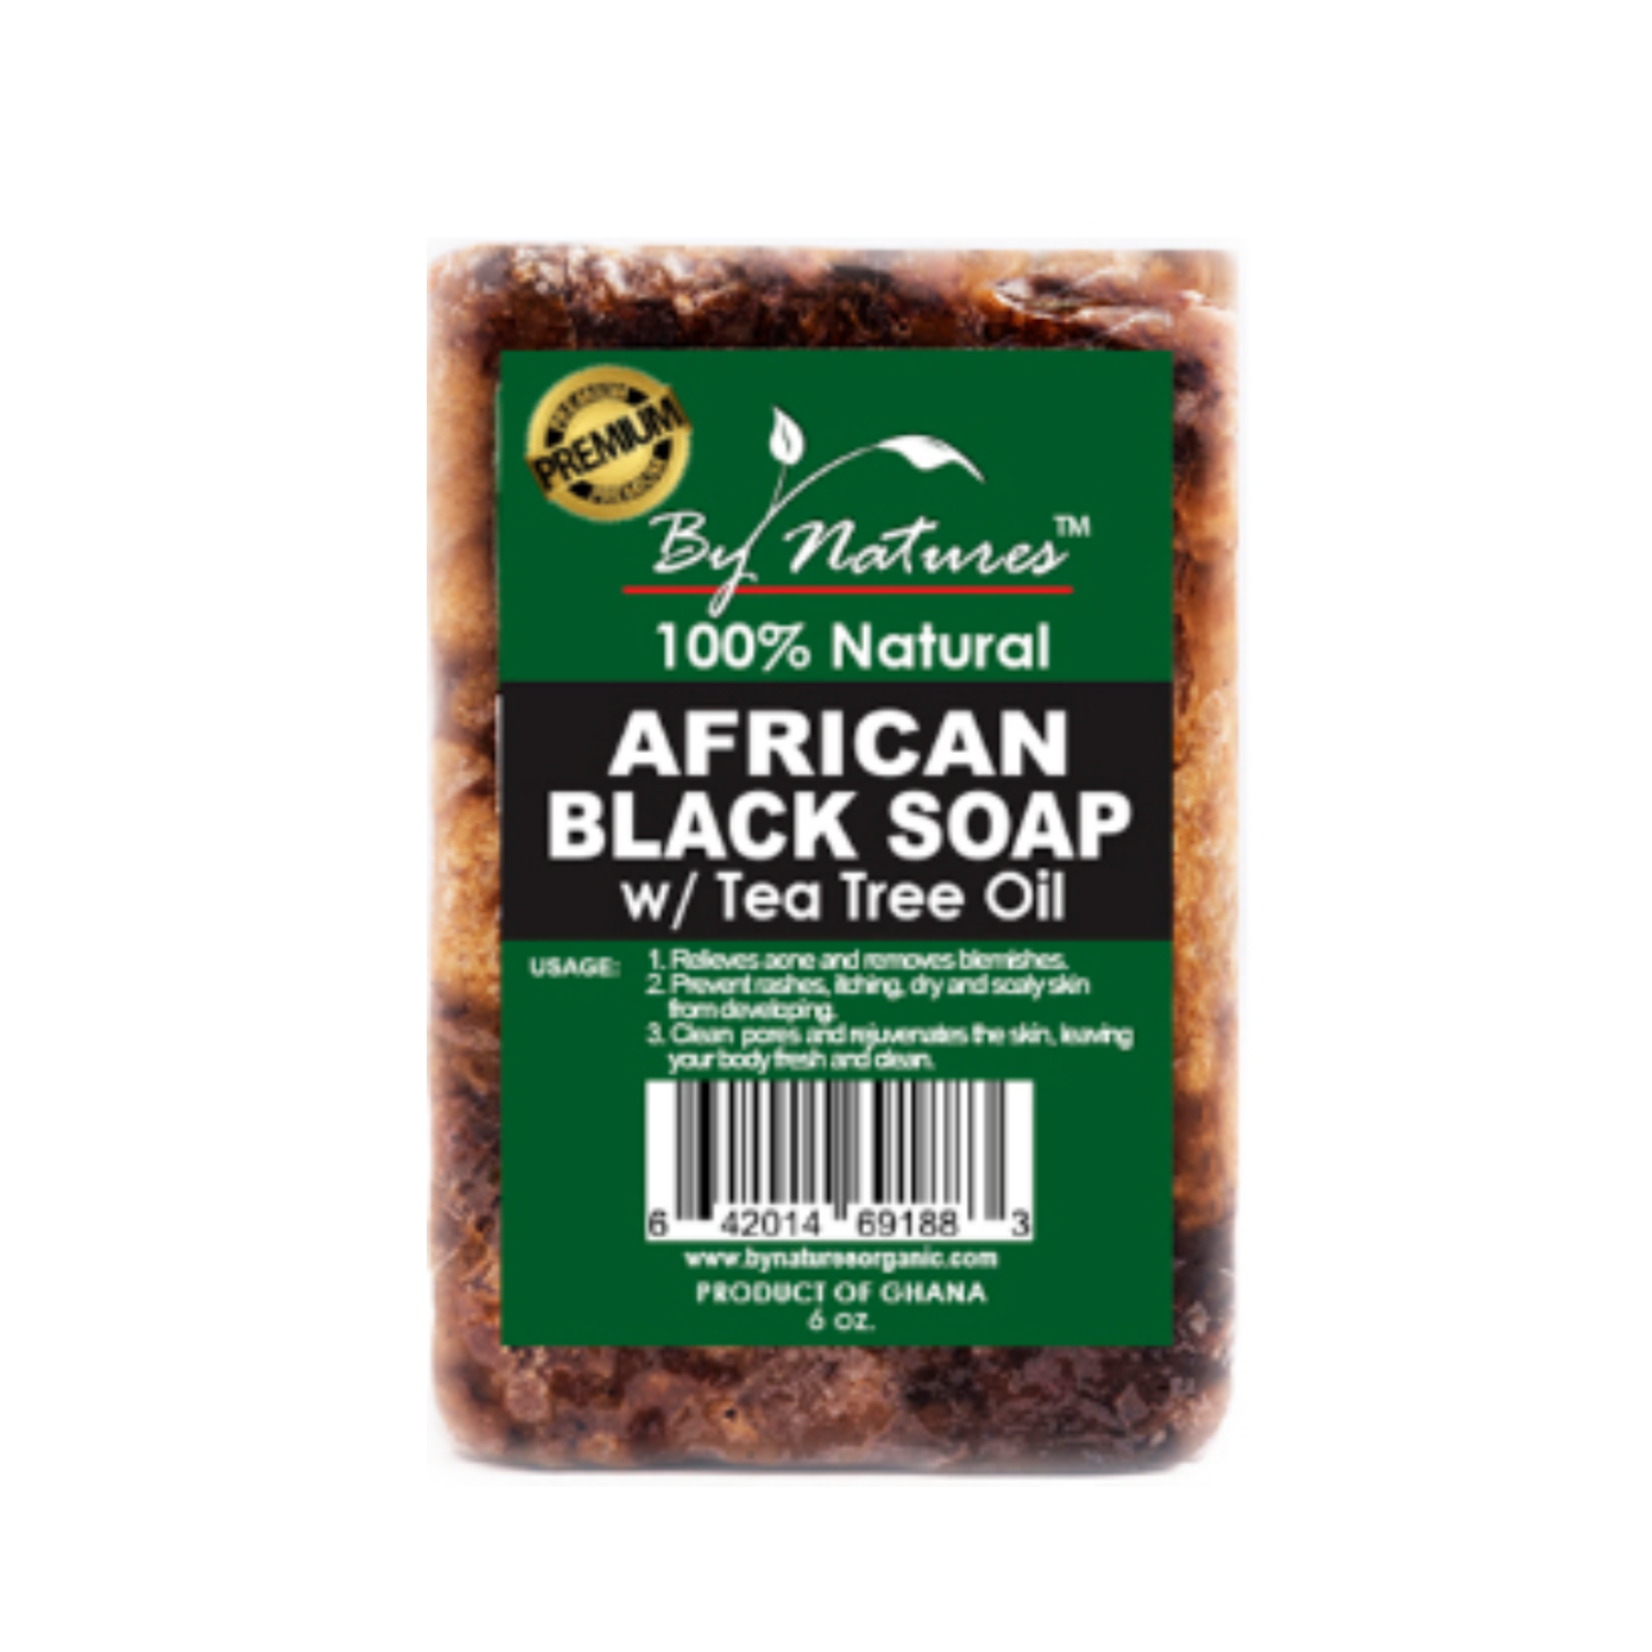 By Natures By Natures African Black Soap w/ Tea Tree Oil